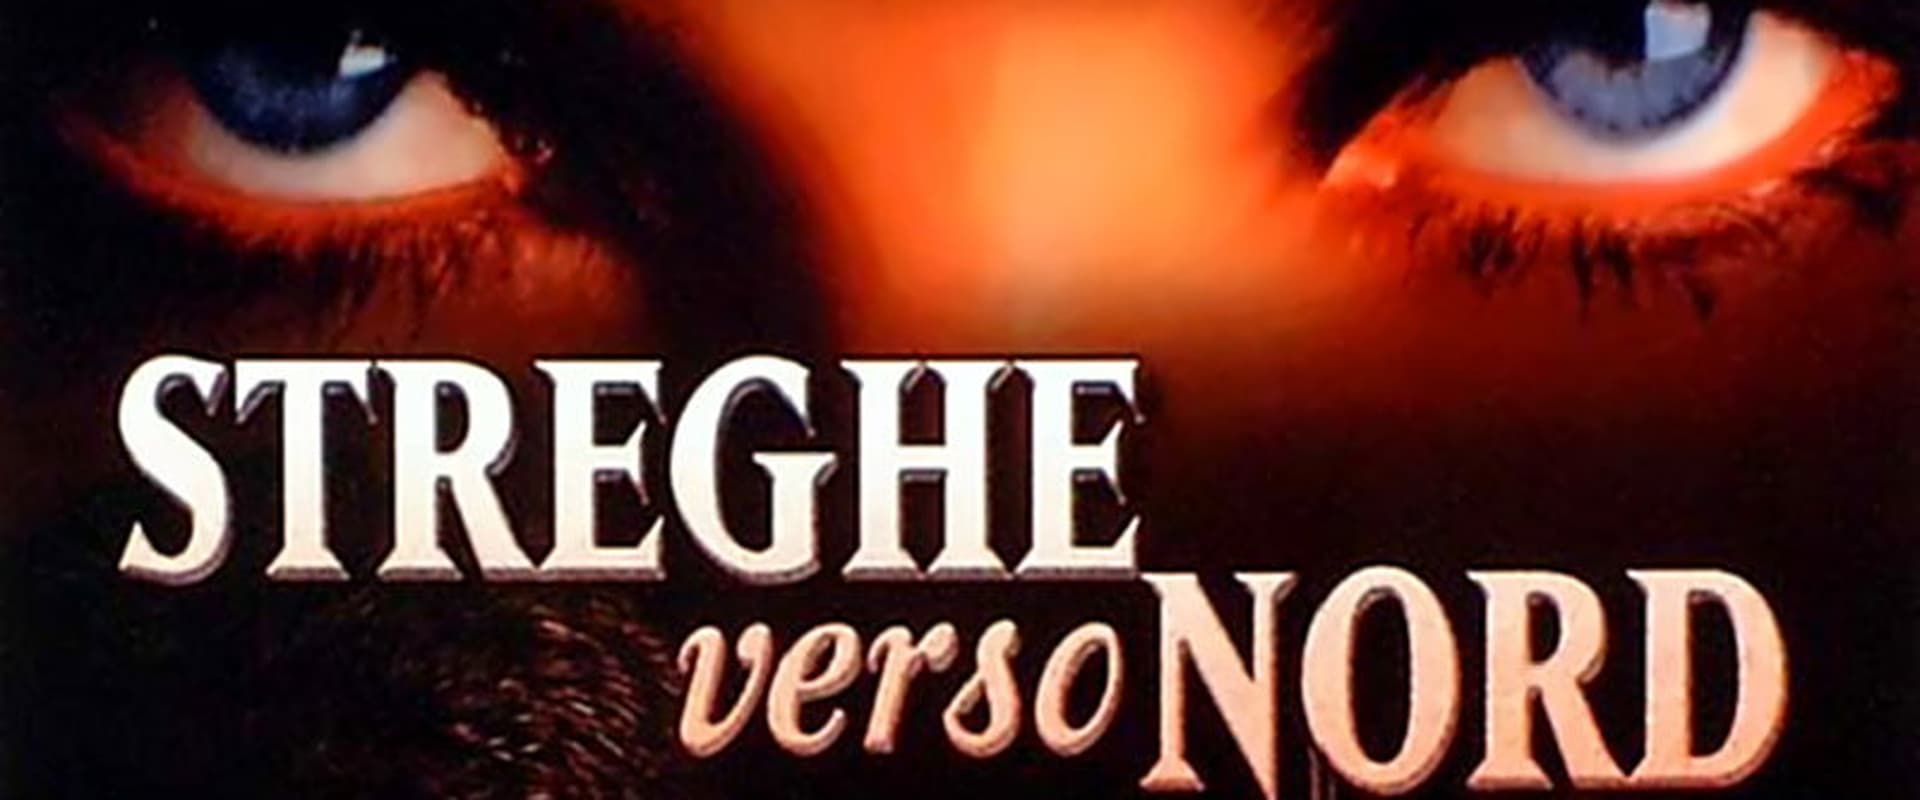 Streghe verso nord (2001)